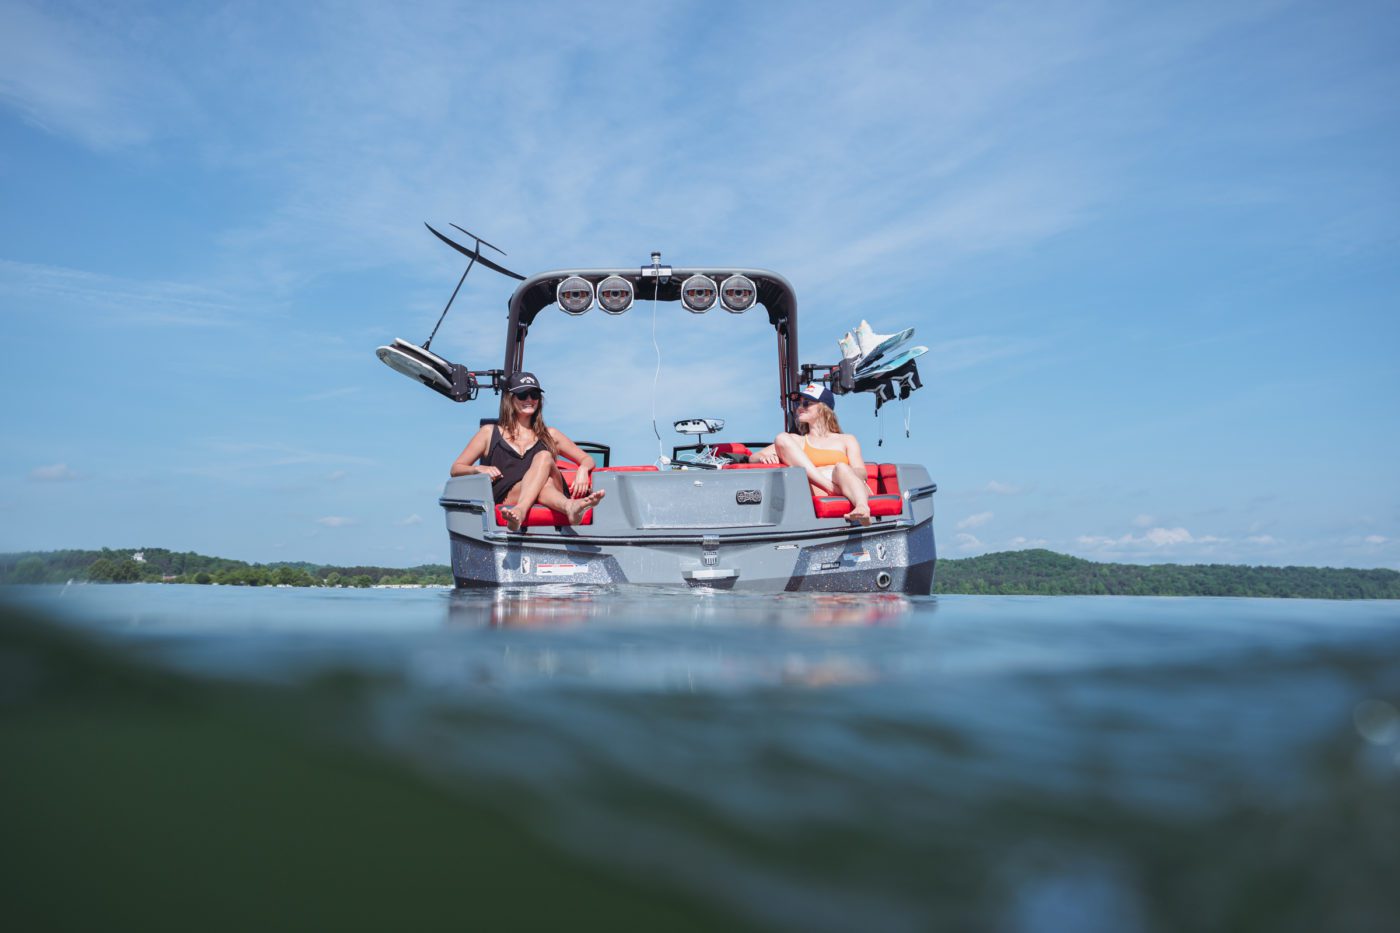 A family enjoys the day on the water in a wake boat.